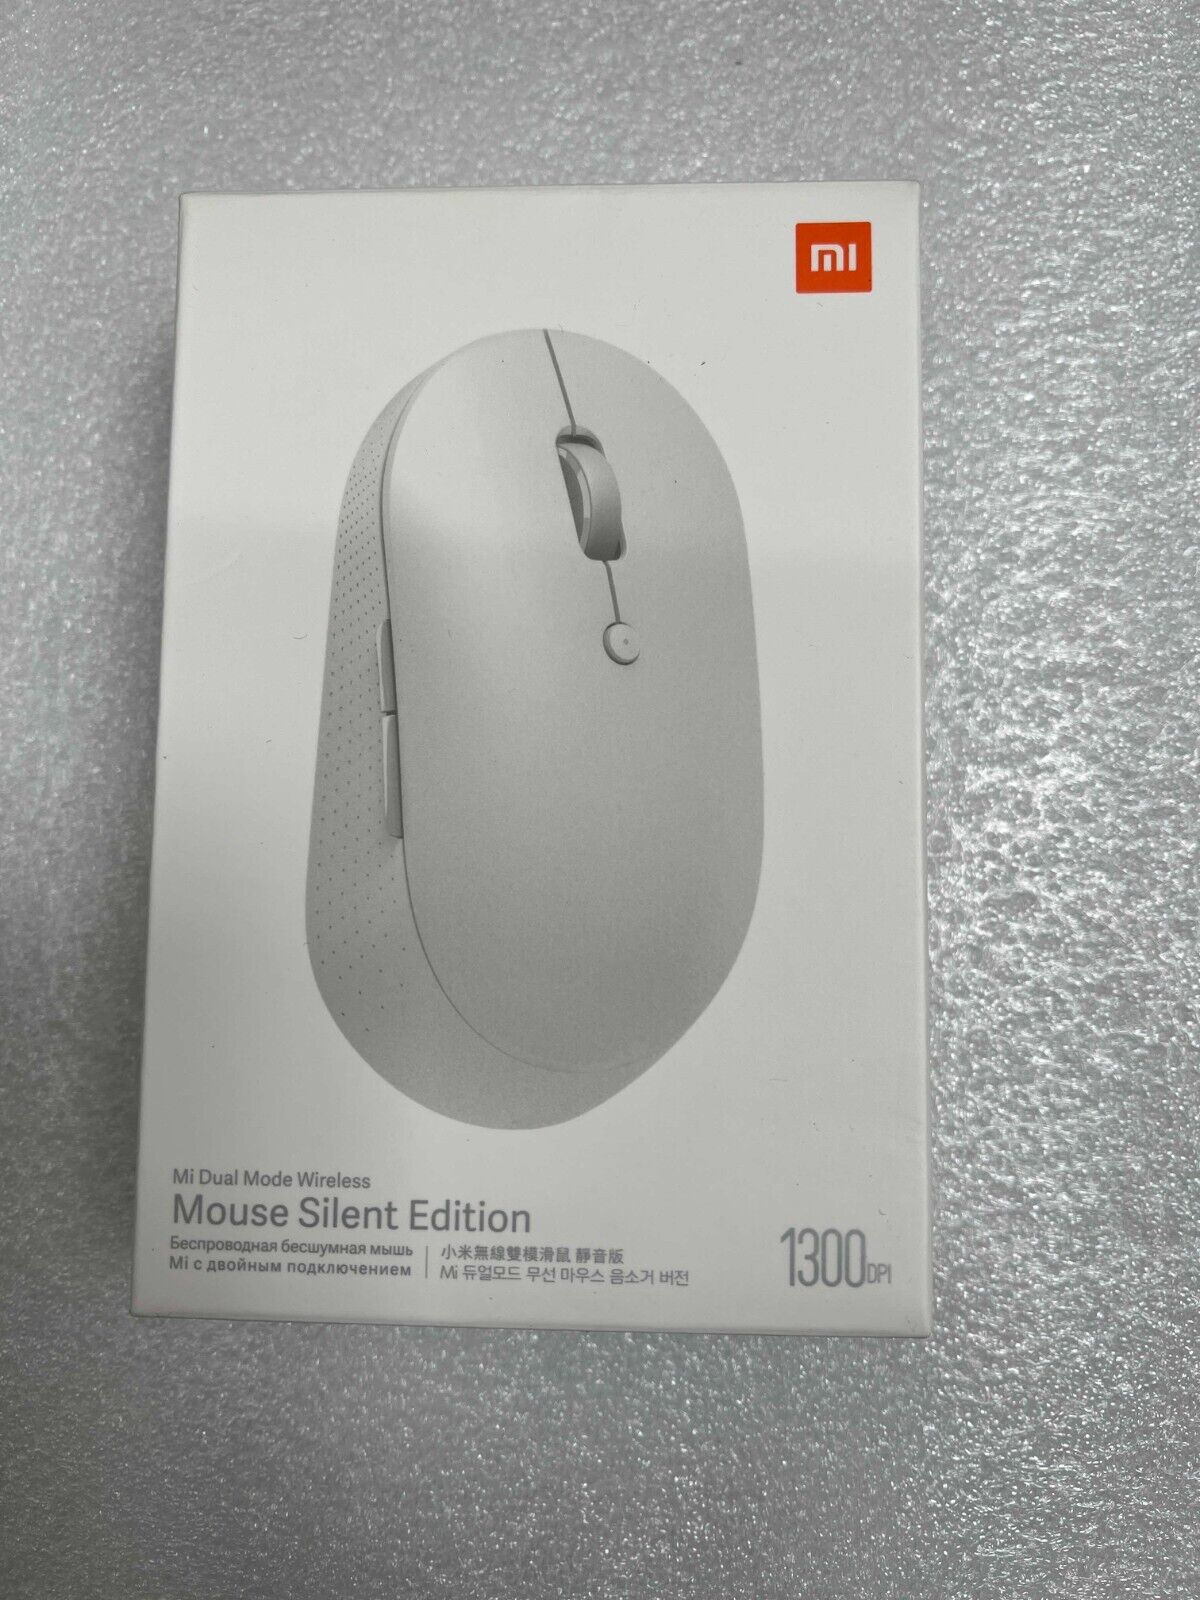 Lot of 14 Xiaomi Mi Dual Mode Wireless Mouse Silent Edition  Bluetooth